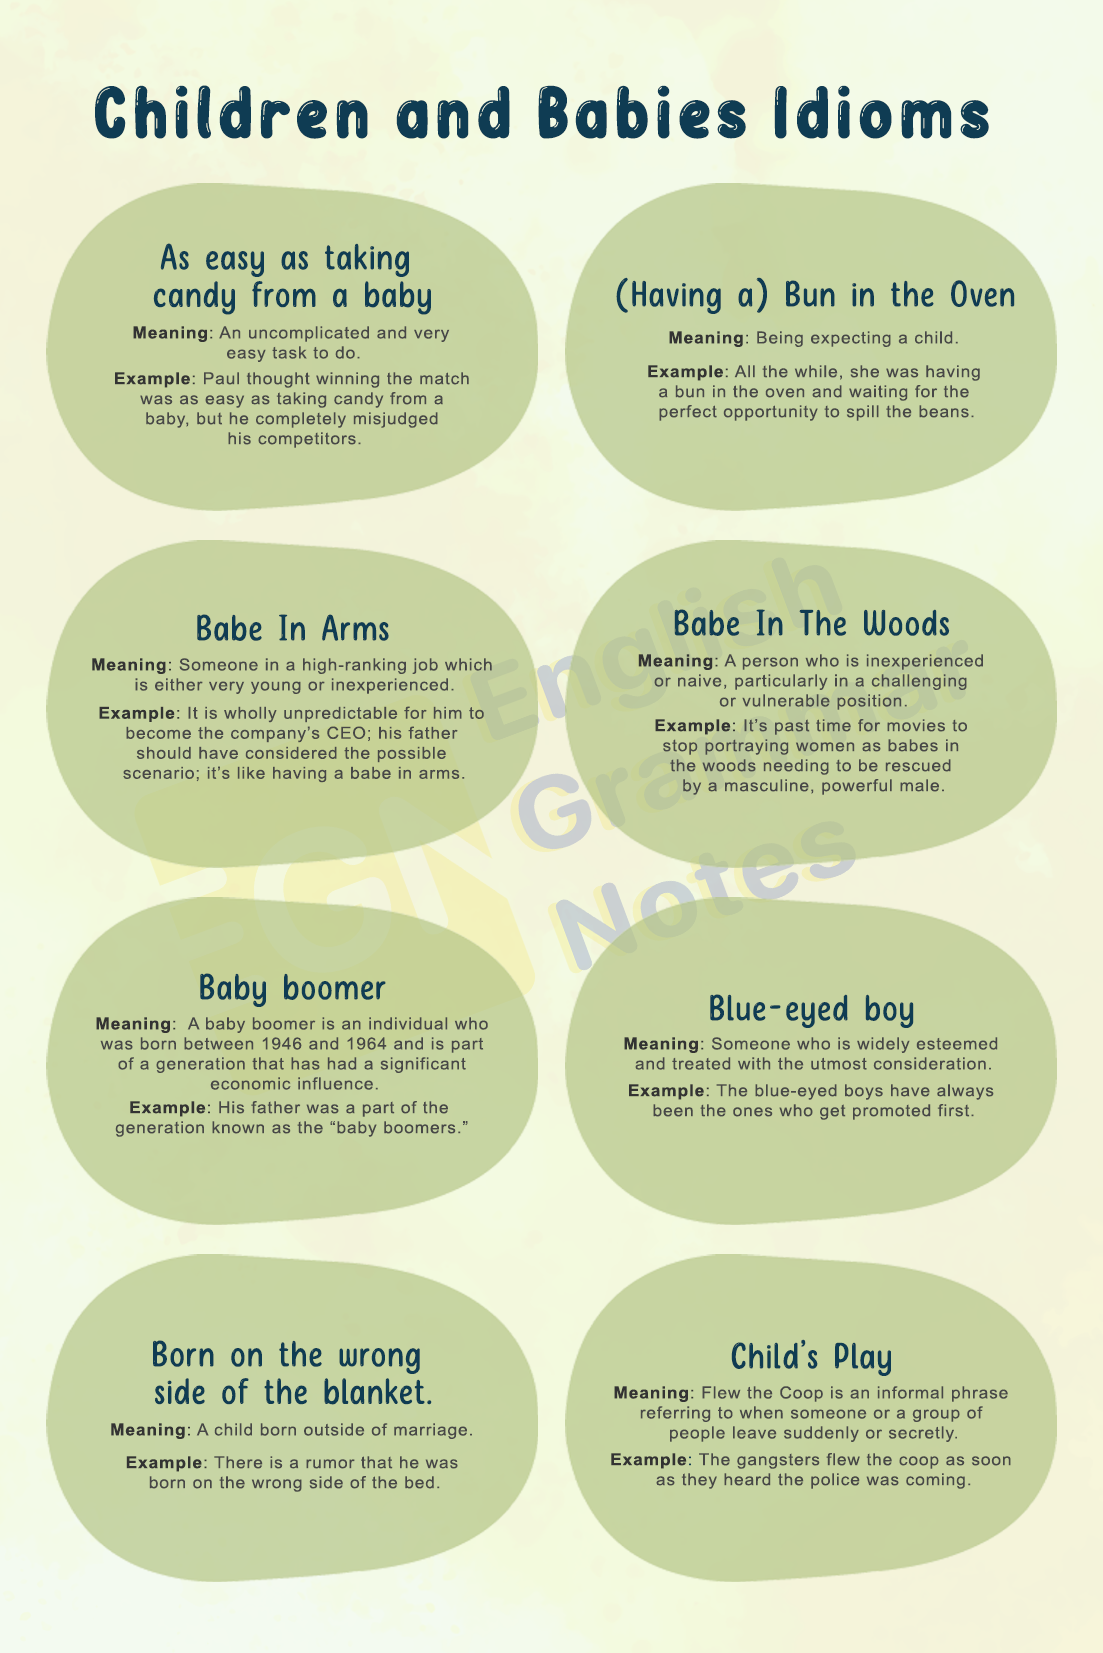 List of Children and Babies Idioms